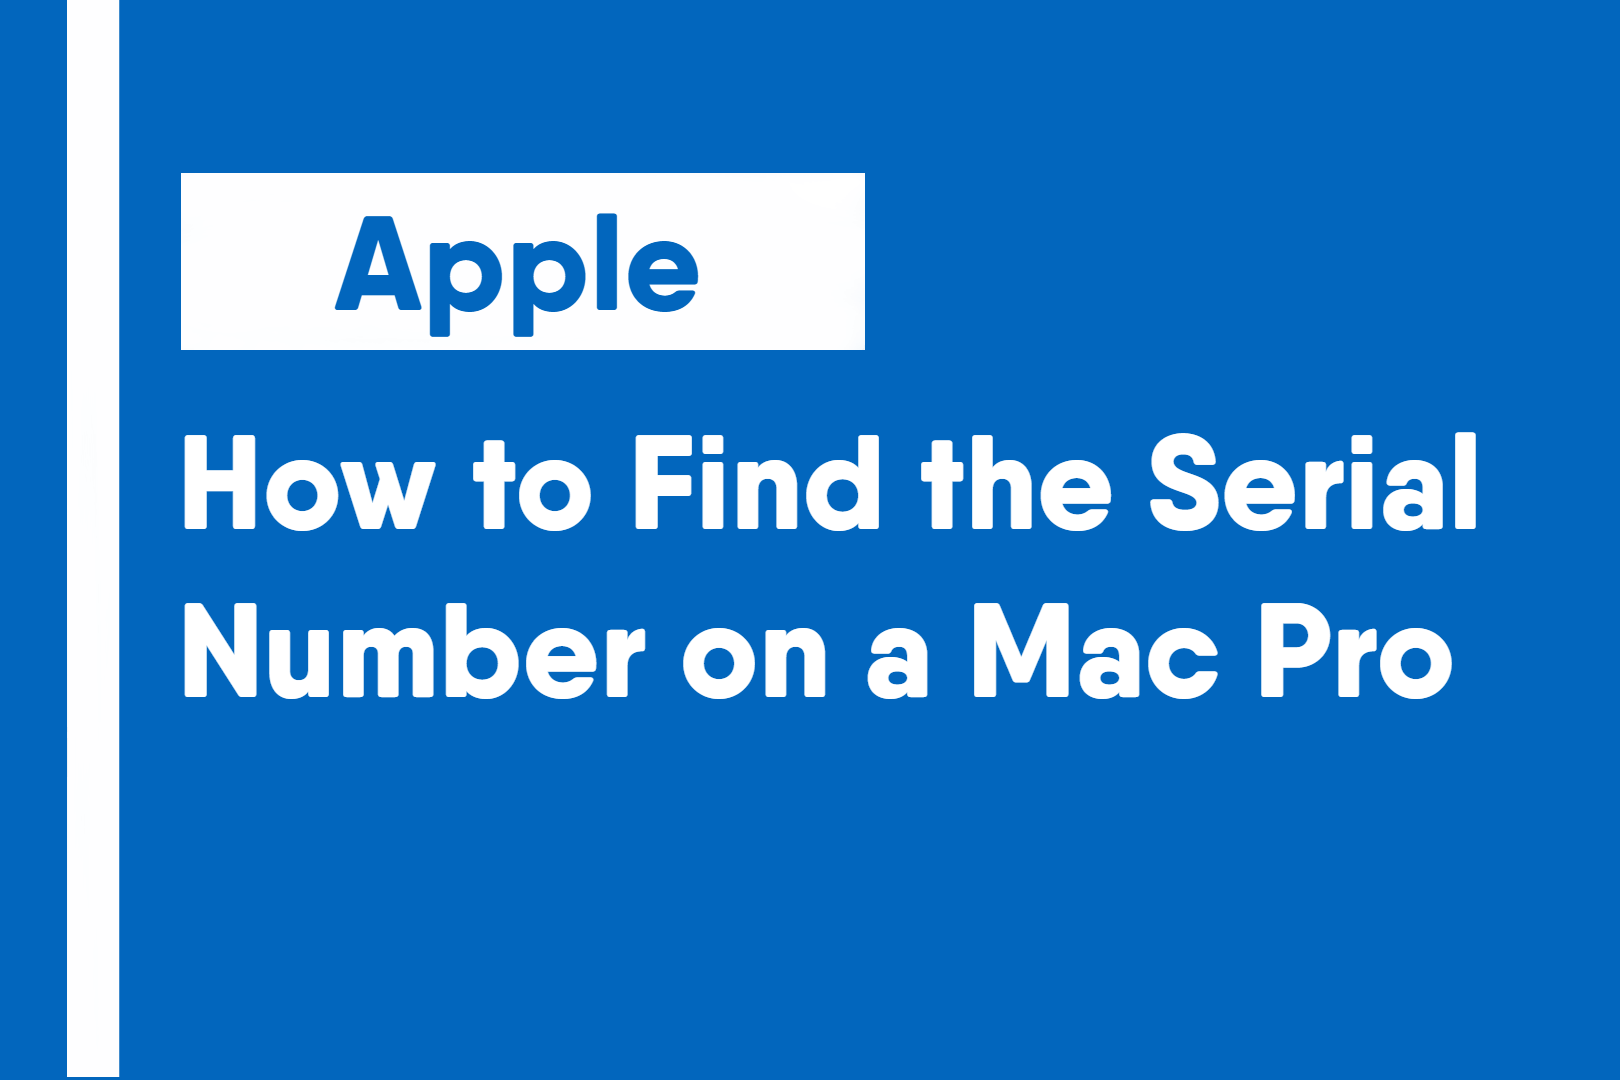 How to Find the Serial Number on a Mac Pro